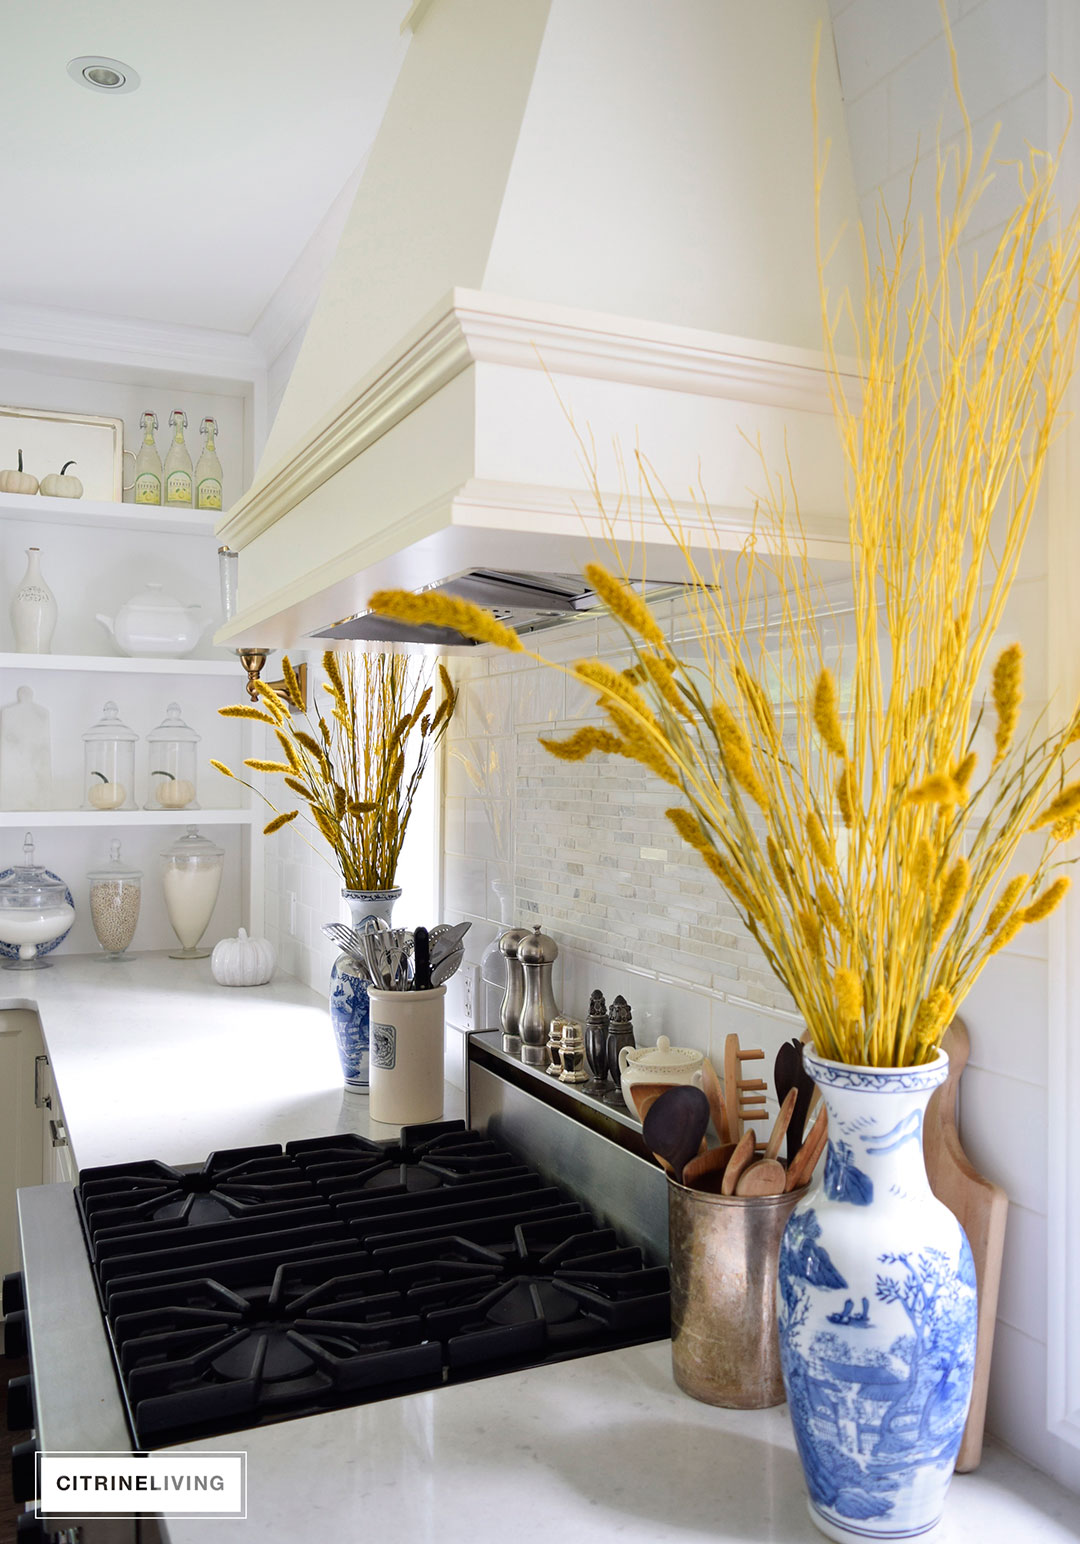 Fall decorated kitchen with blue and white ginger jars, rich gold accents and figs as a decorative element